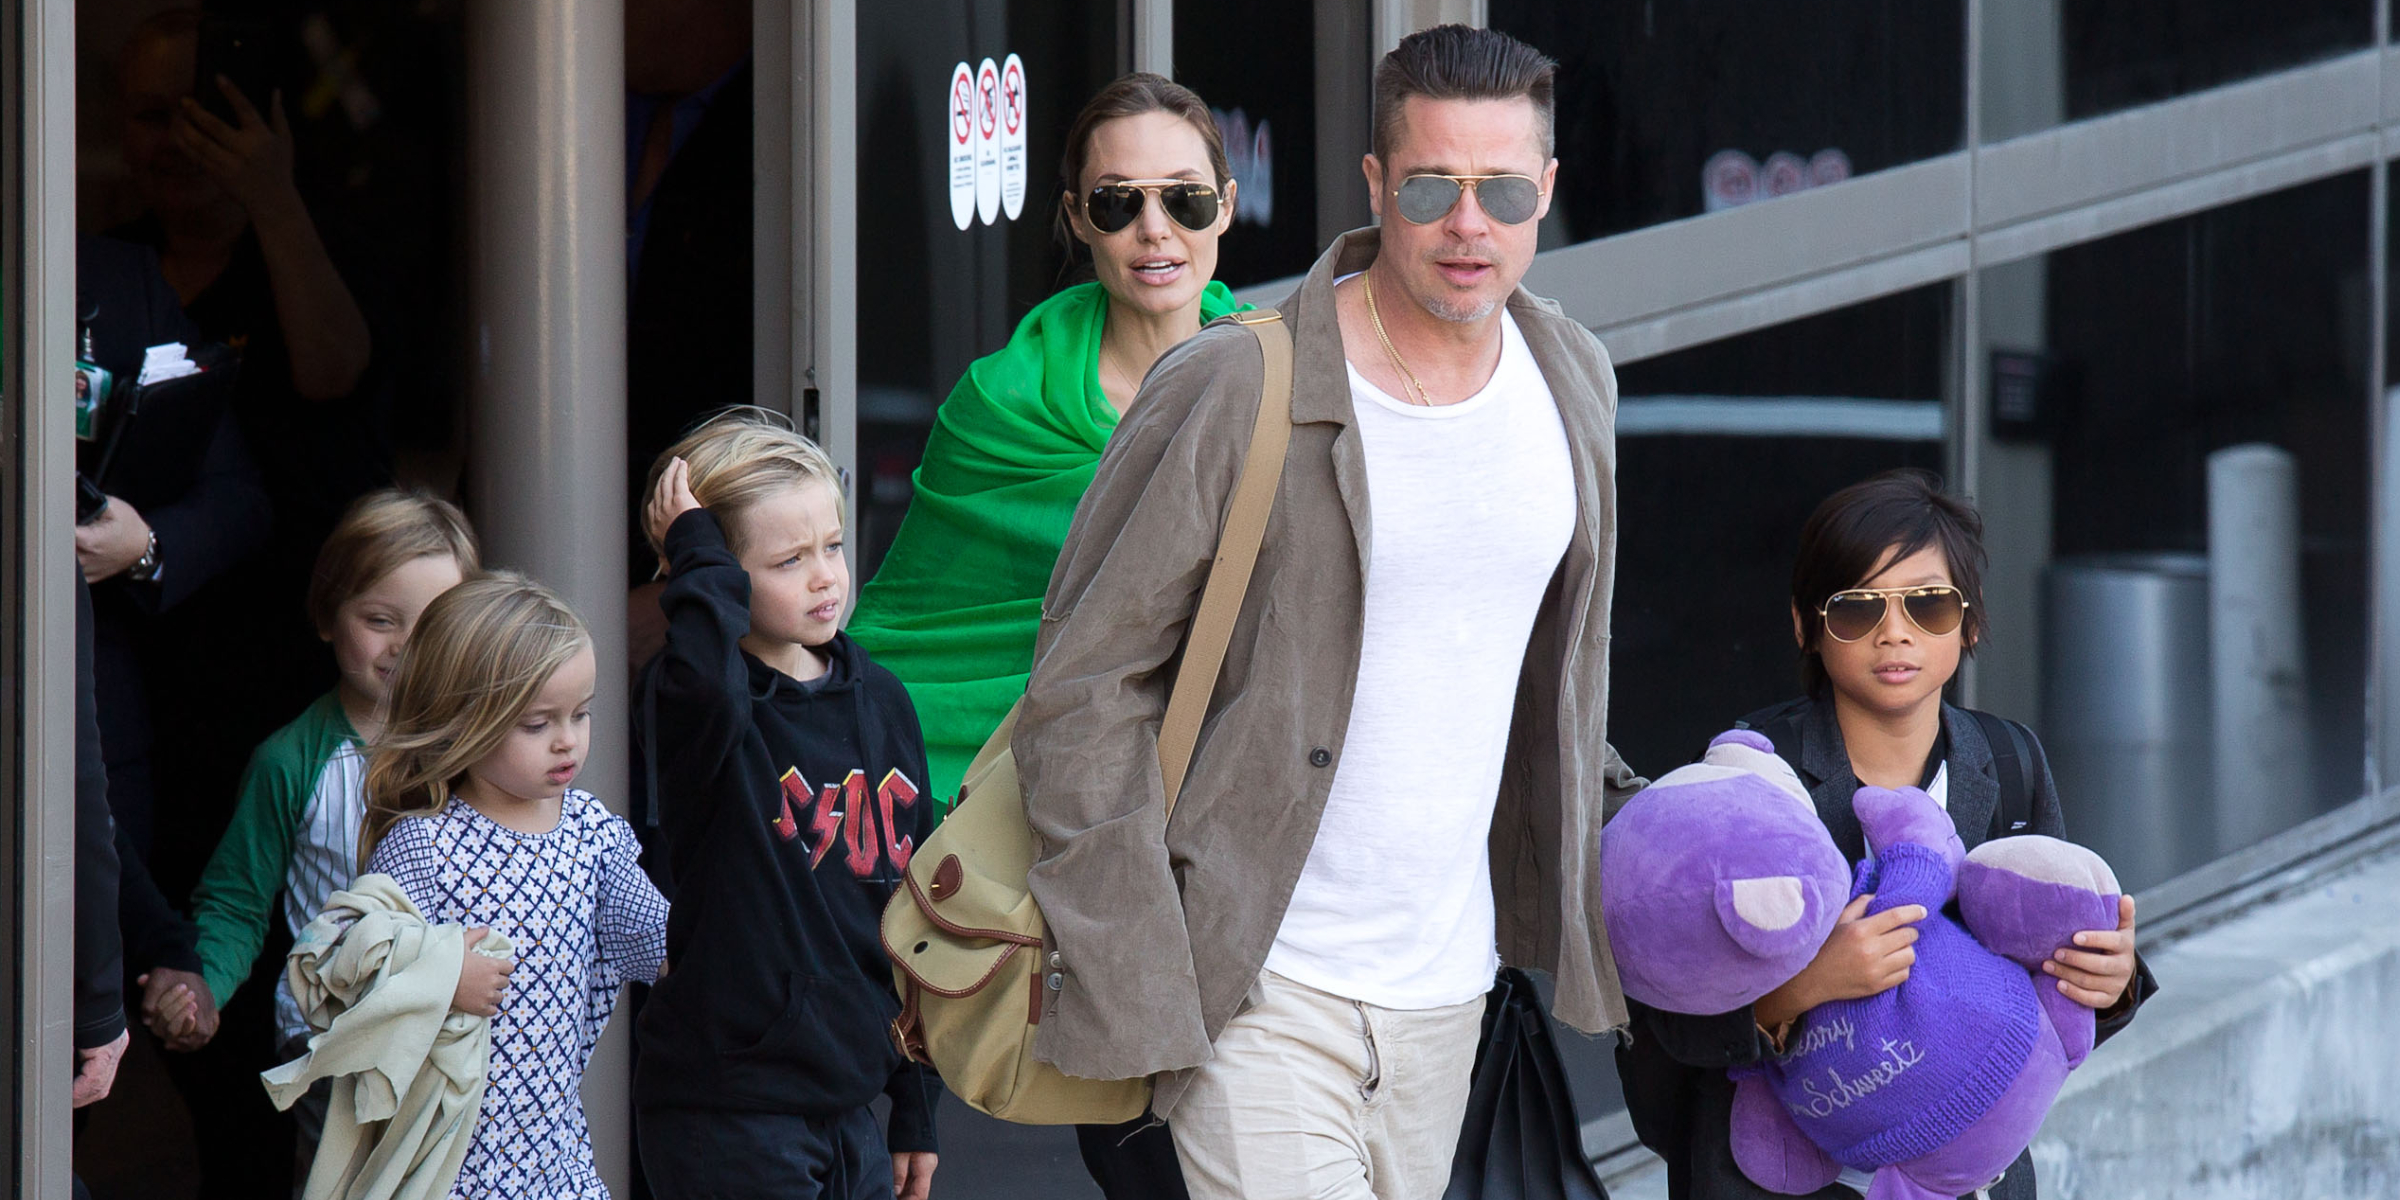 Brad Pitt and Angelina Jolie with their kids Pax, Shiloh, Vivienne, and Knox. | Source: Getty Images